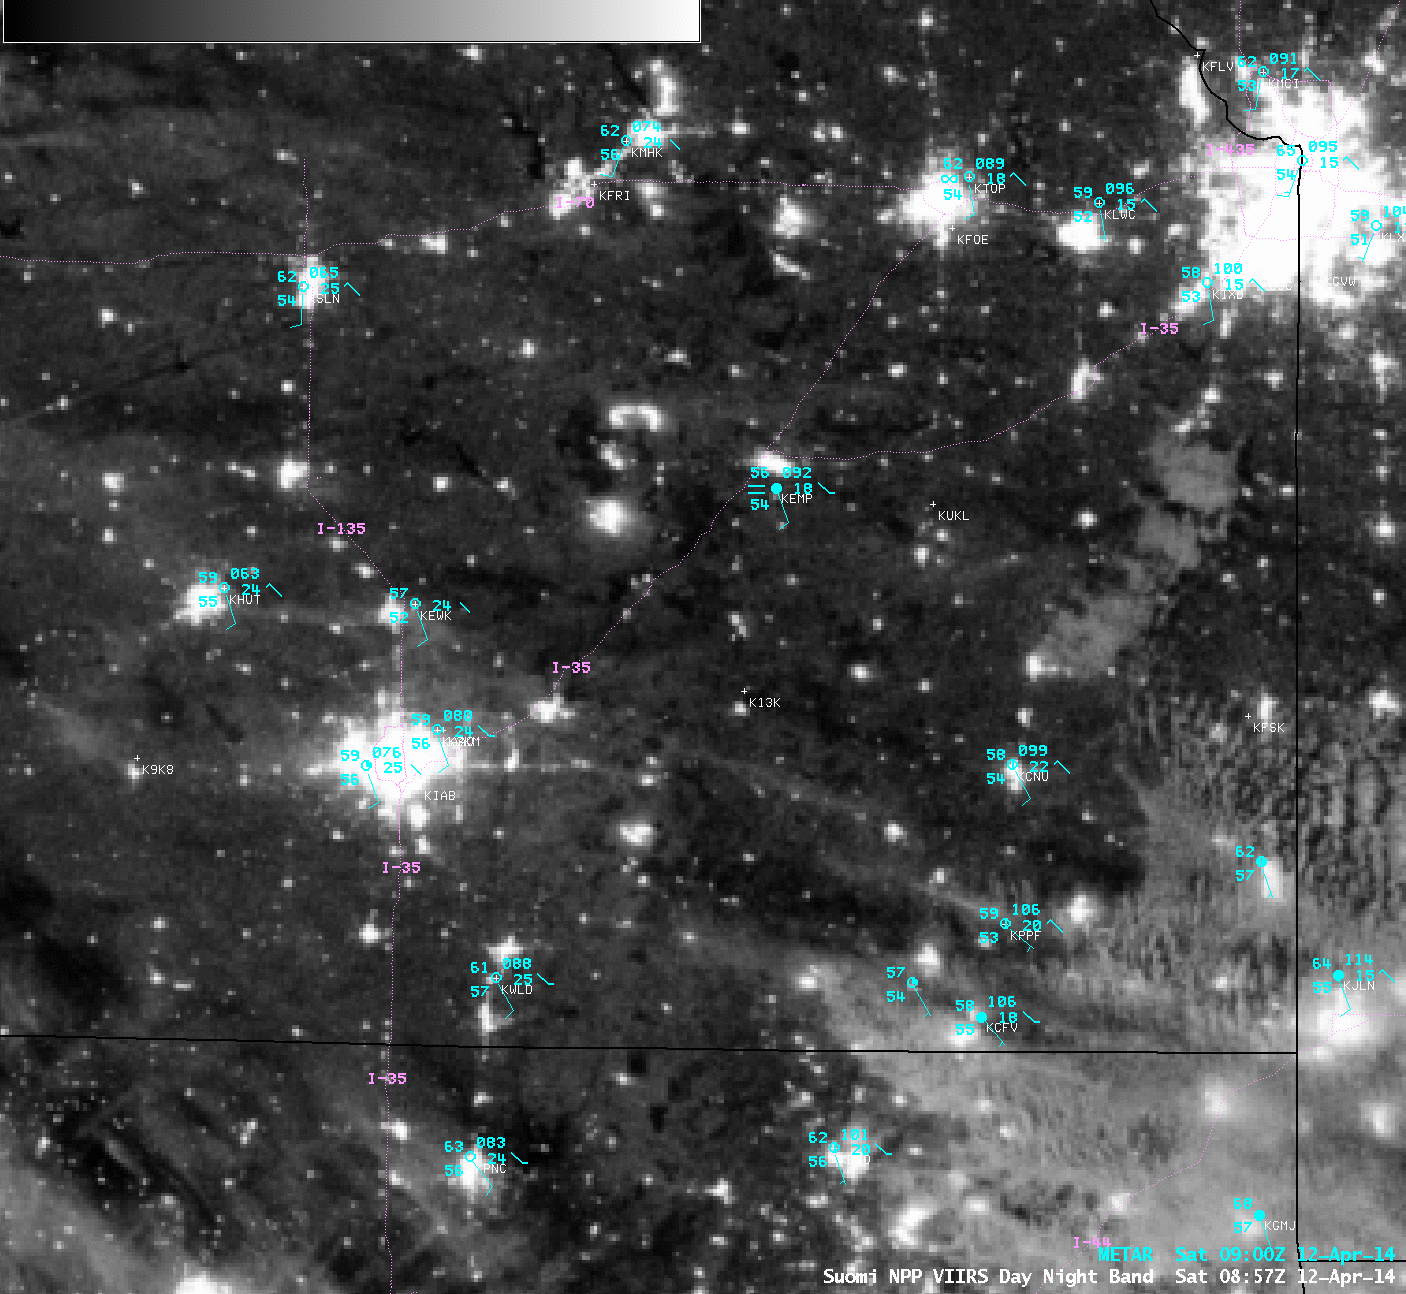 Suomi NPP VIIRS 0.7 Âµm Day/Night Band and 3.74 Âµm shortwave IR images